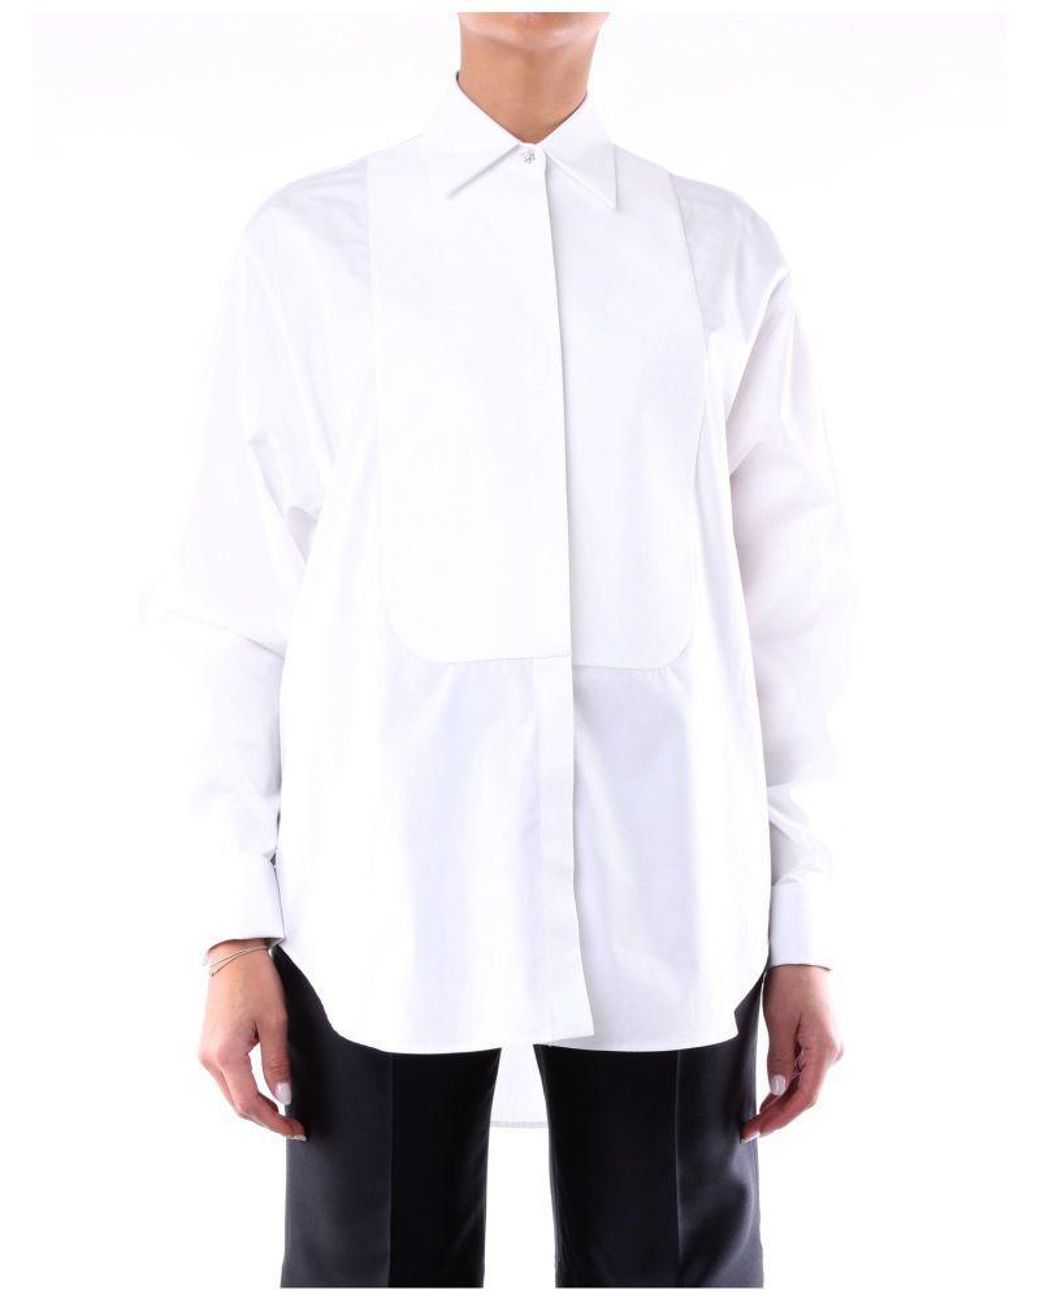 Givenchy Cotton Shirt in White - Lyst